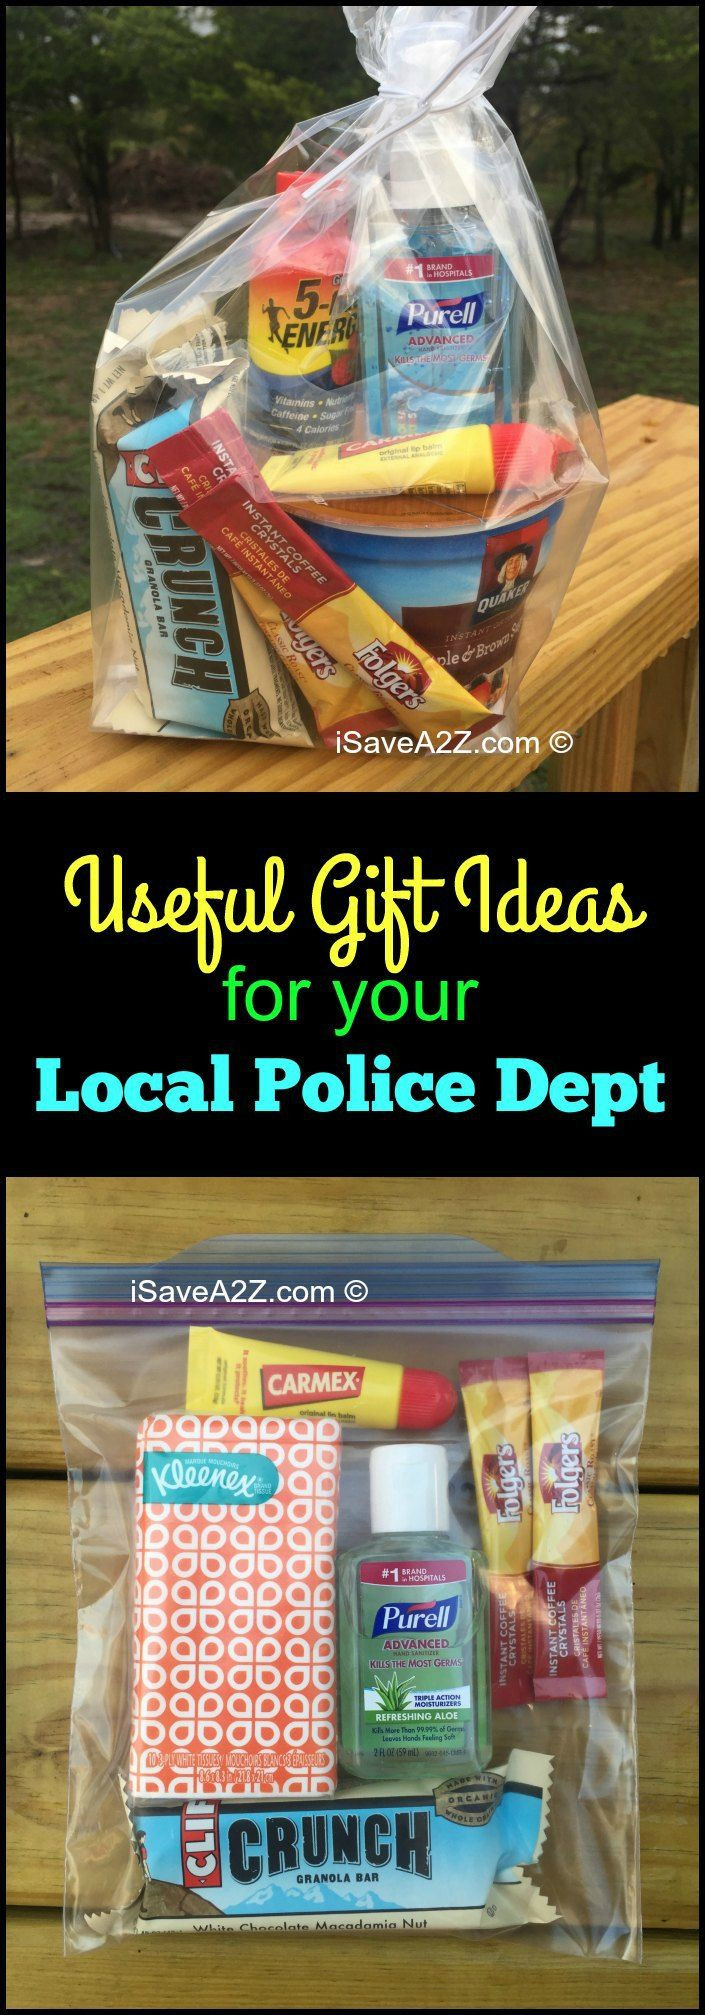 Law Enforcement Gift Ideas
 Small Appreciation Gift Ideas for your Local Police